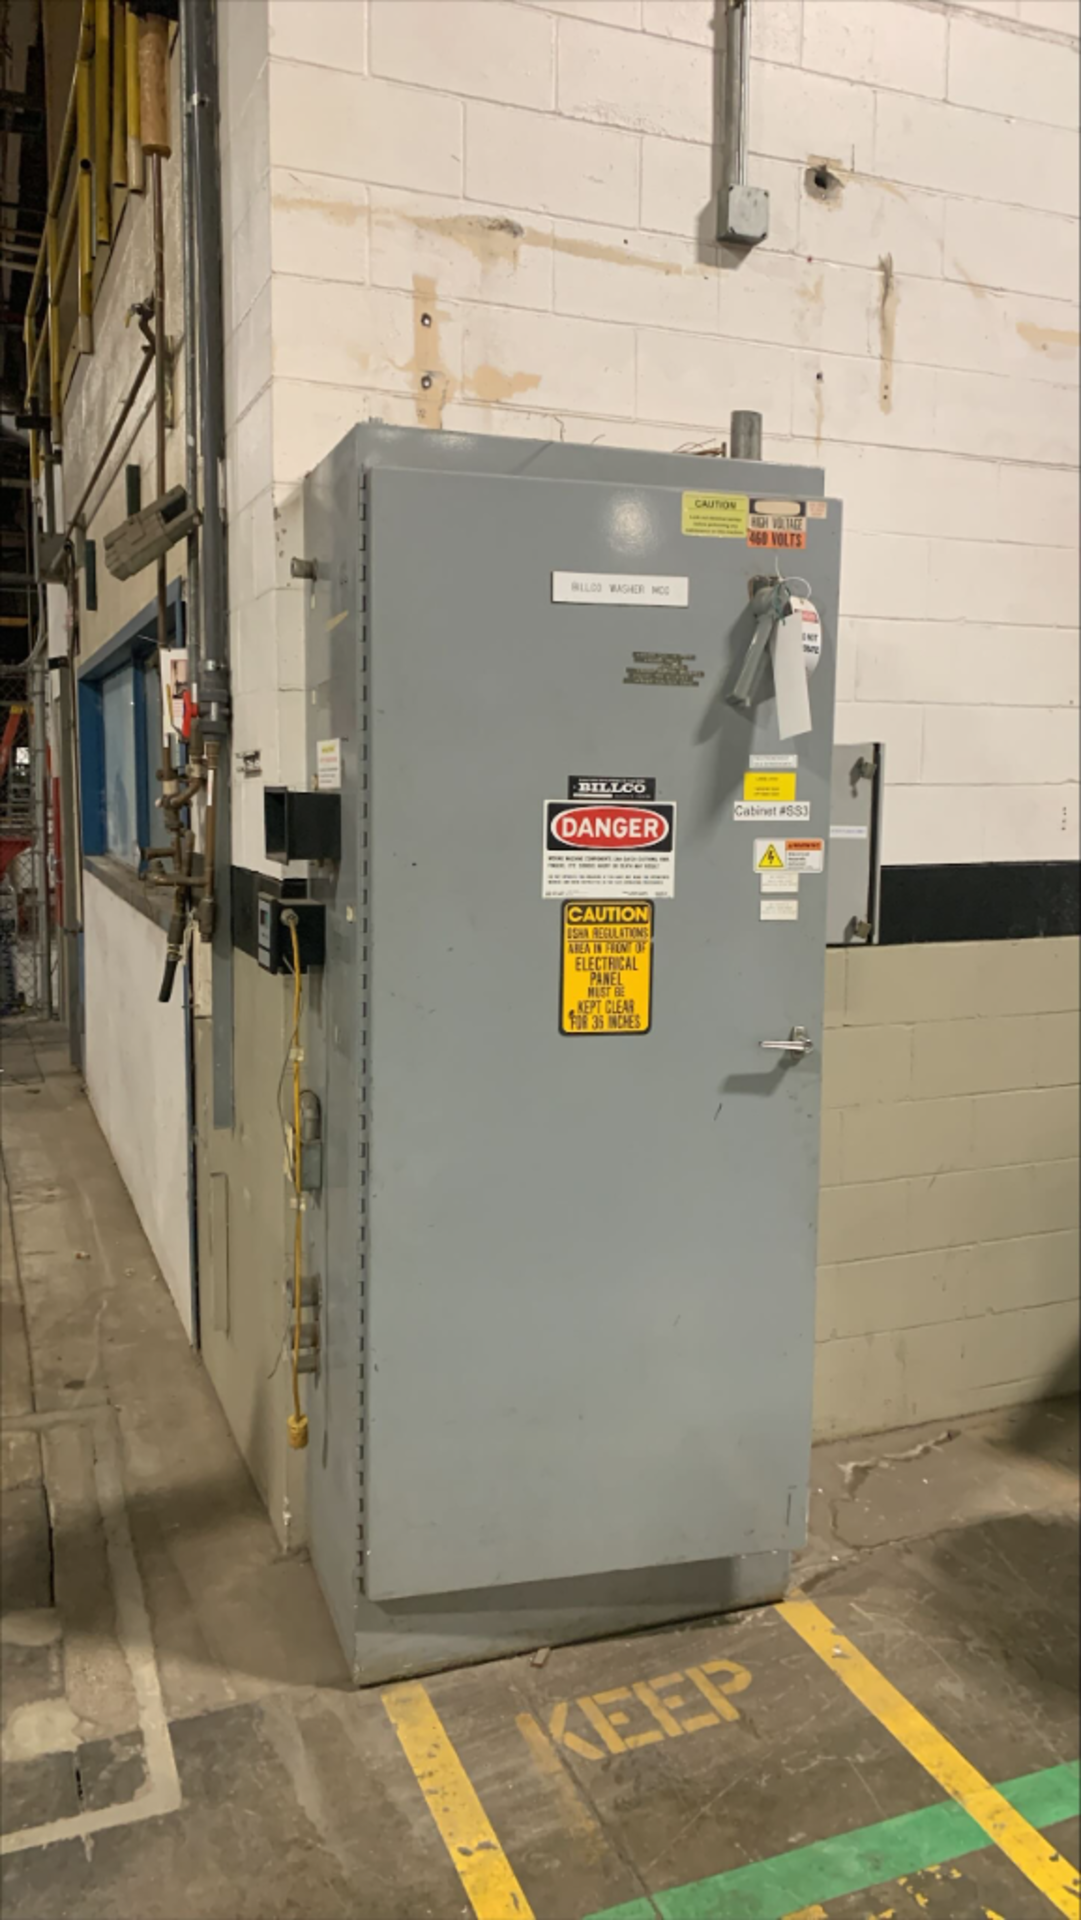 Electrical Cabinet with contents